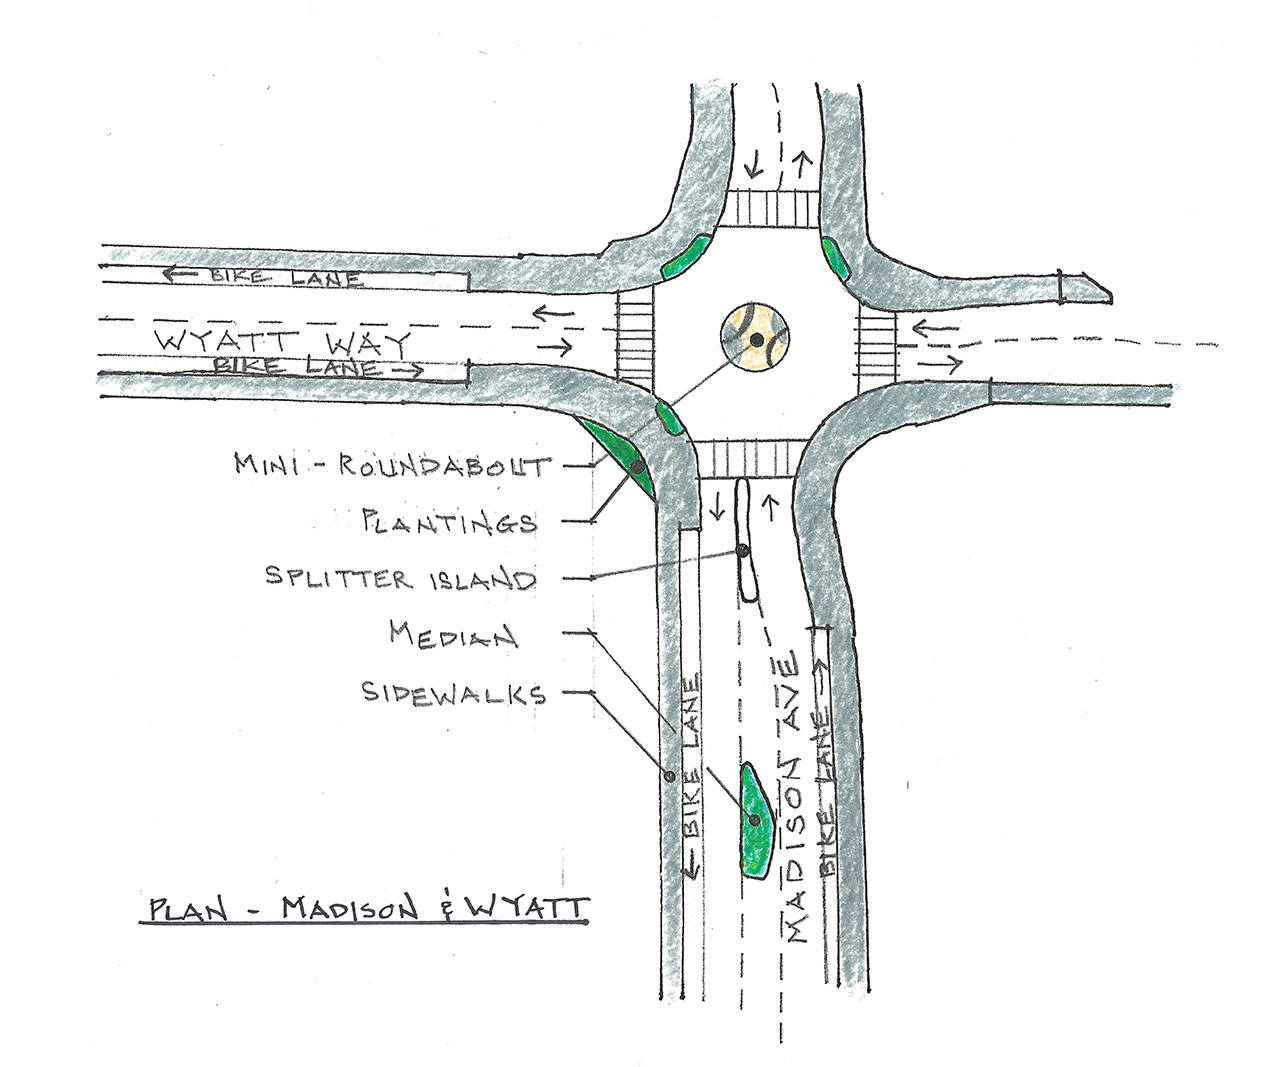 Image courtesy of the city of Bainbridge Island | An illustration of the upcoming changes to the Wyatt Way-Madison Avenue intersection.